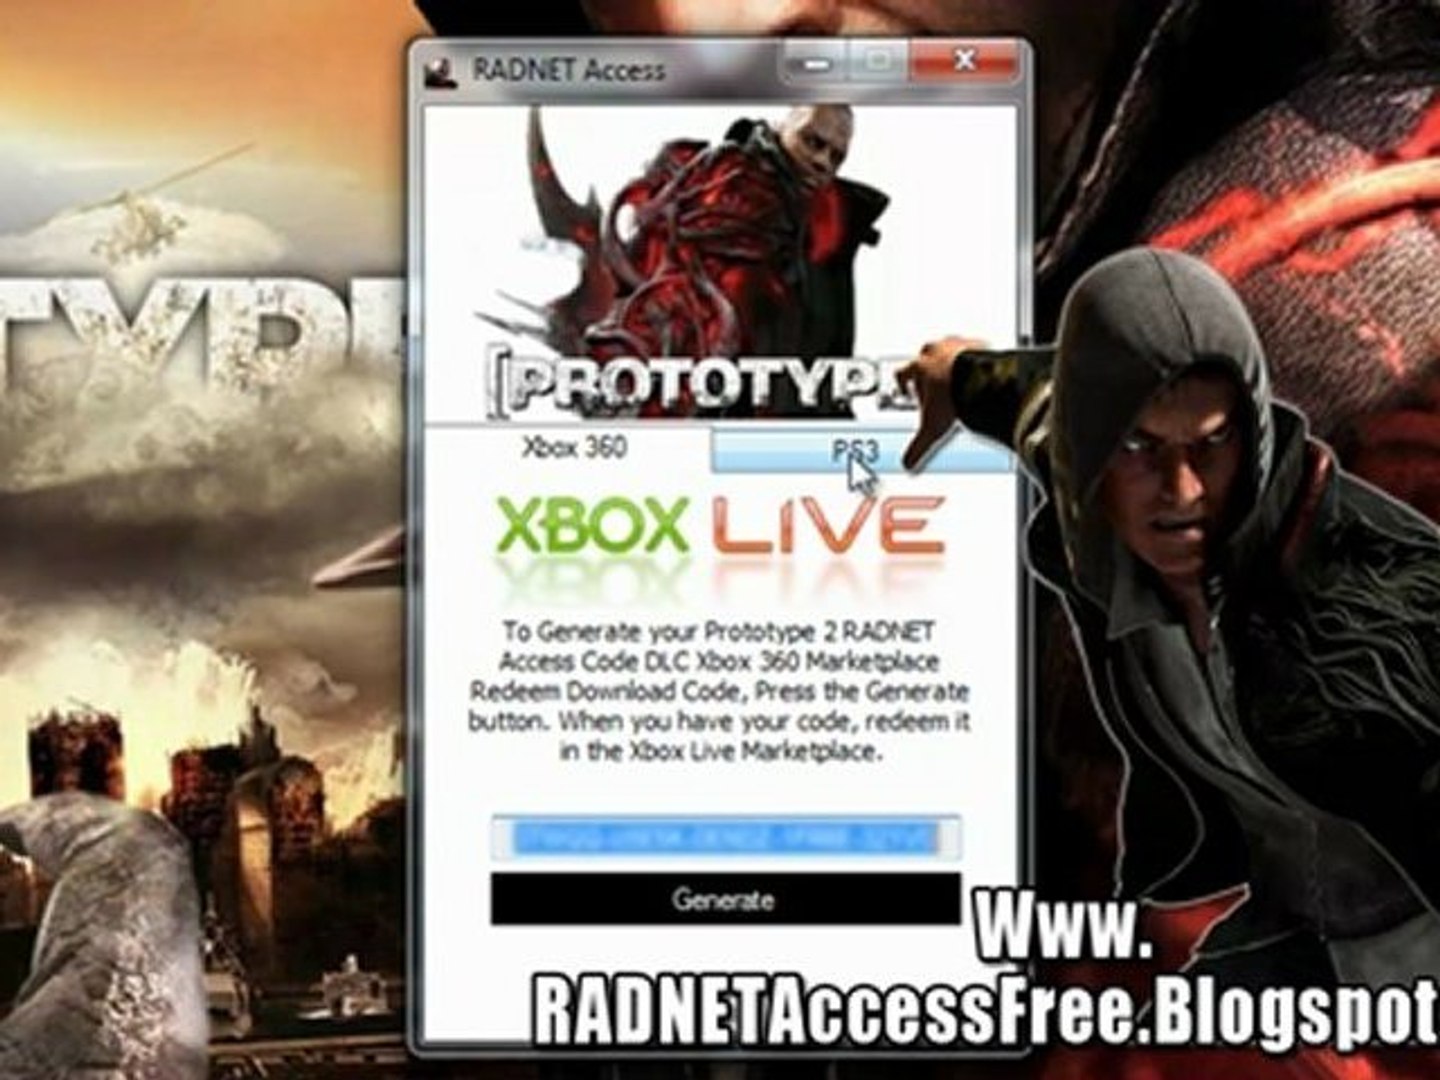 Prototype 2 RADNET Access DLC Free on Xbox 360 And PS3 - video Dailymotion